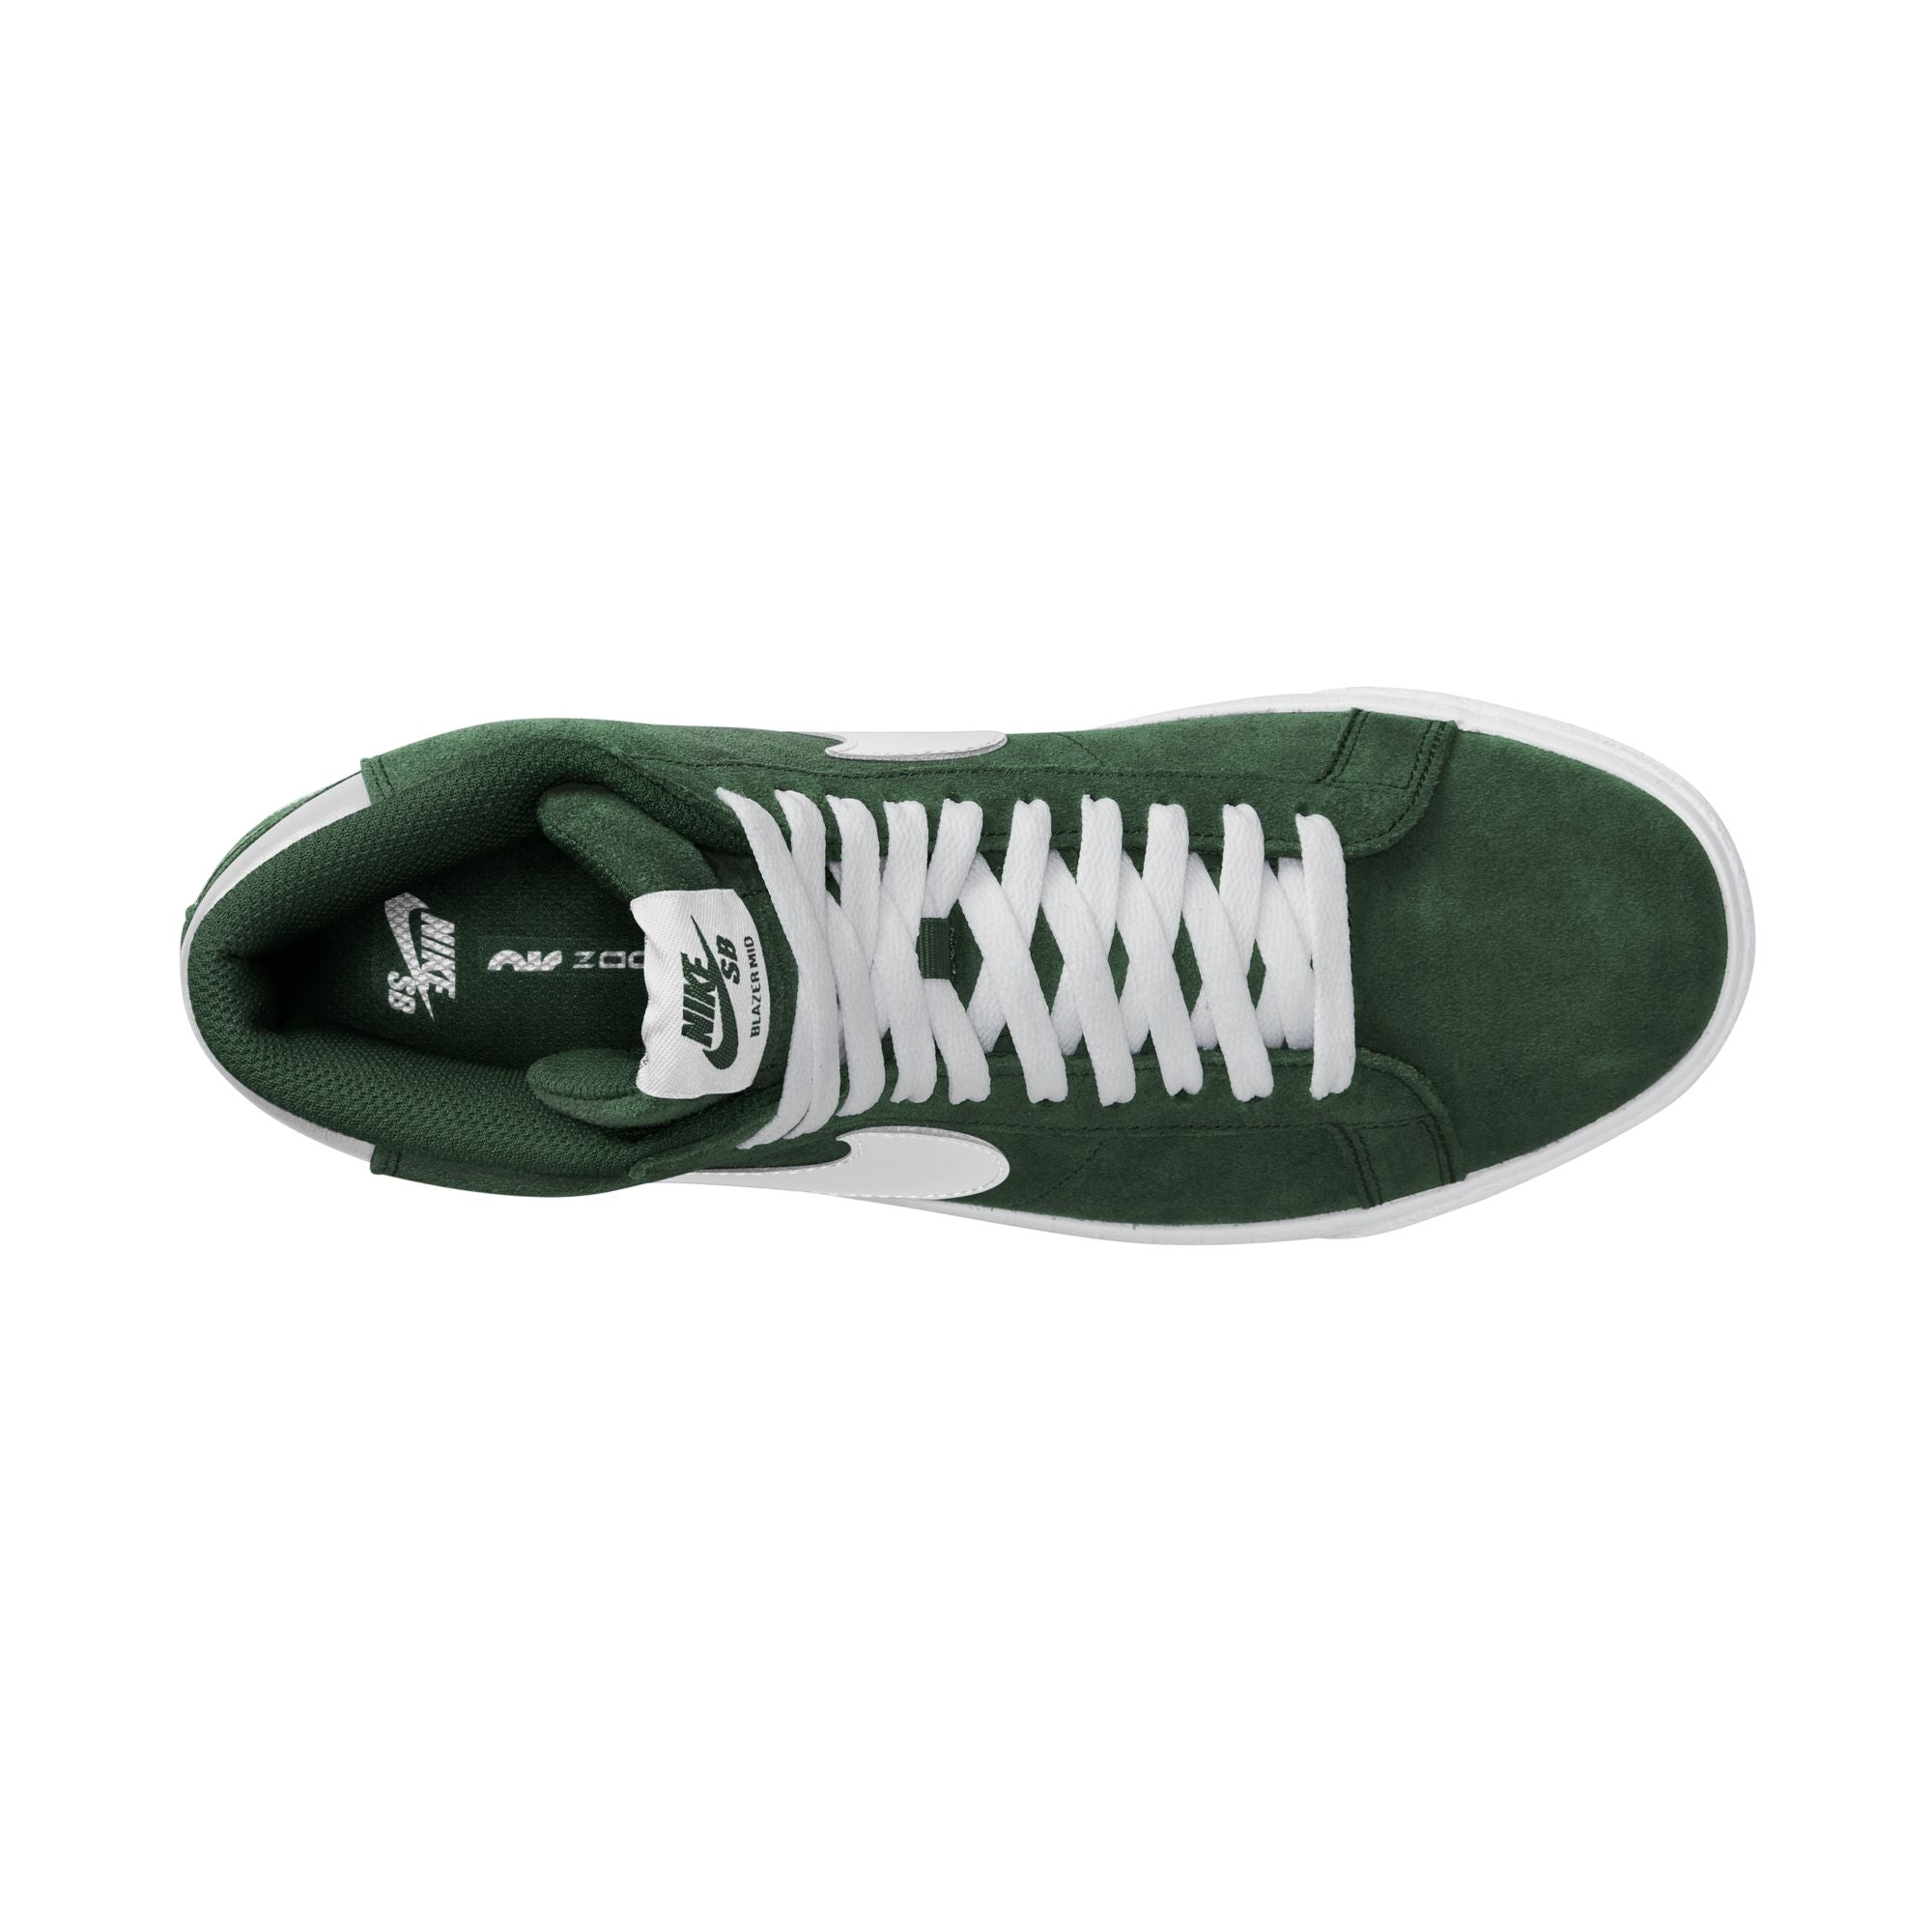 Mid top Nike SB Blazer Mid skate shoes, in Fir Green colourway with white Nike swoosh on sides.